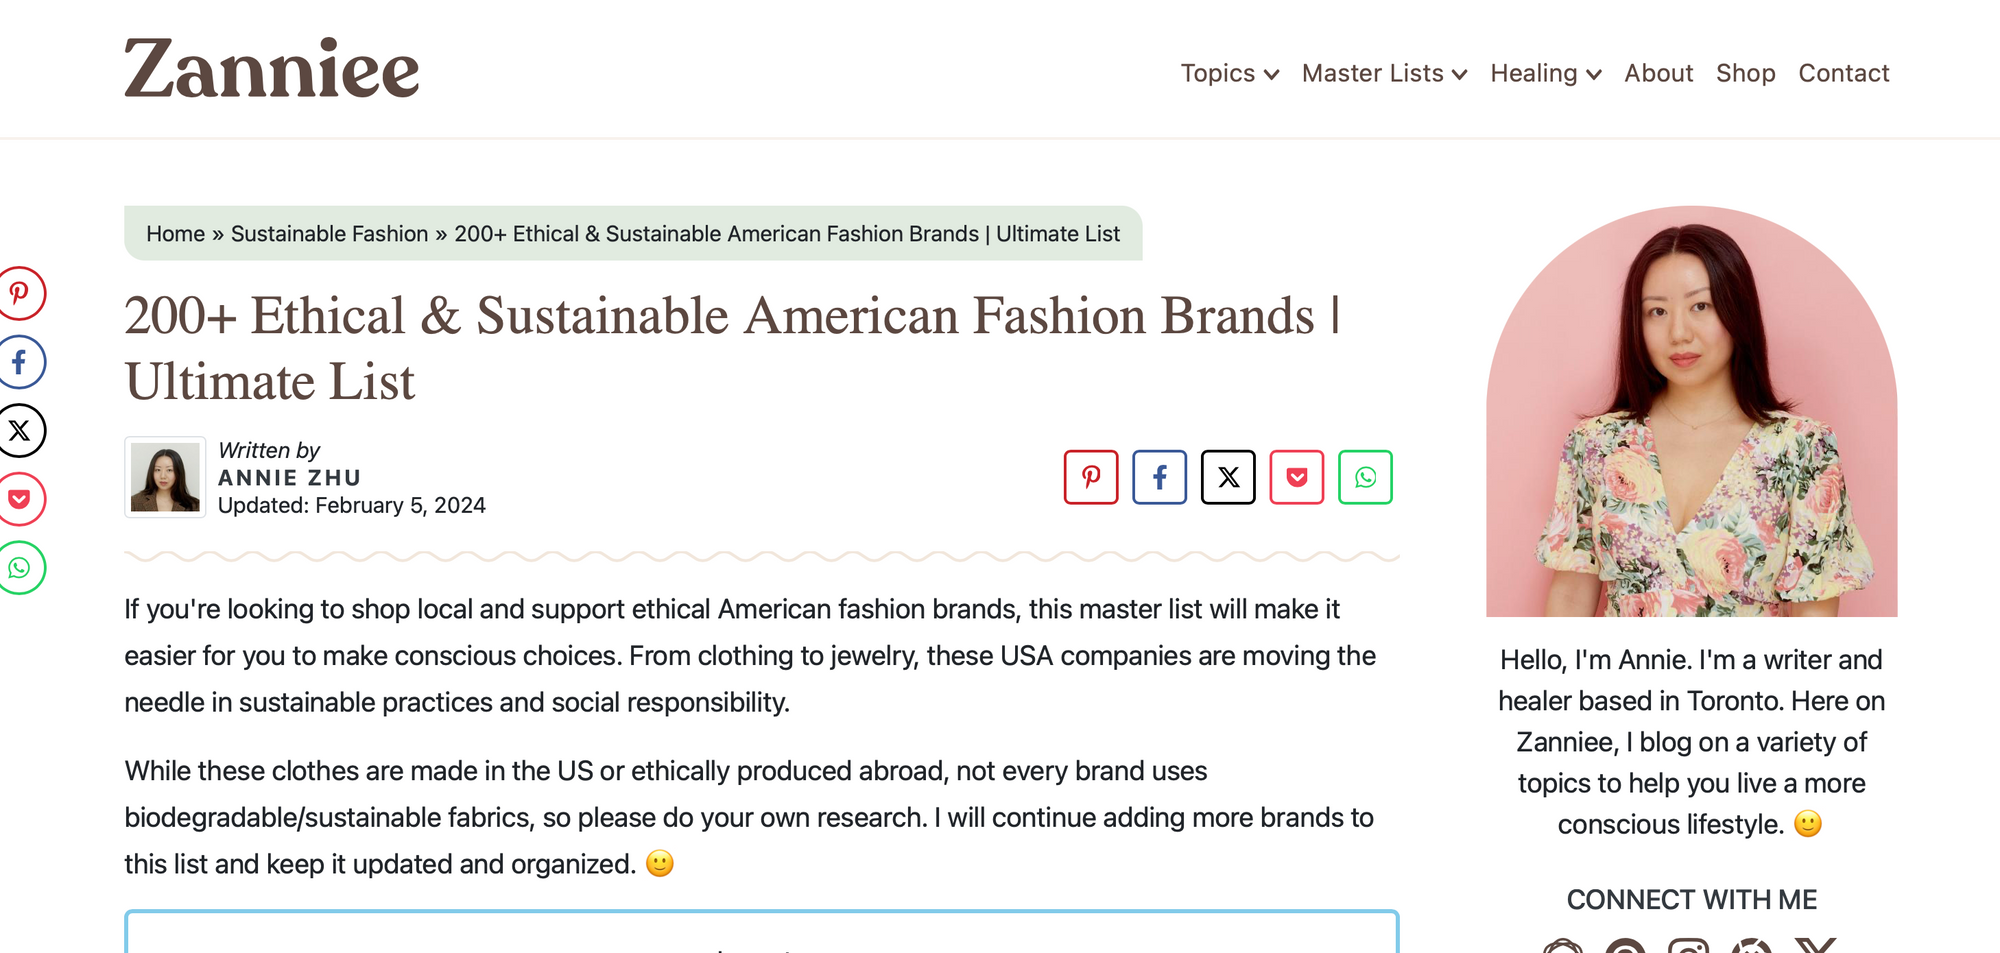 Zanniee 200+ Ethical & sustainable American Fashion Brands